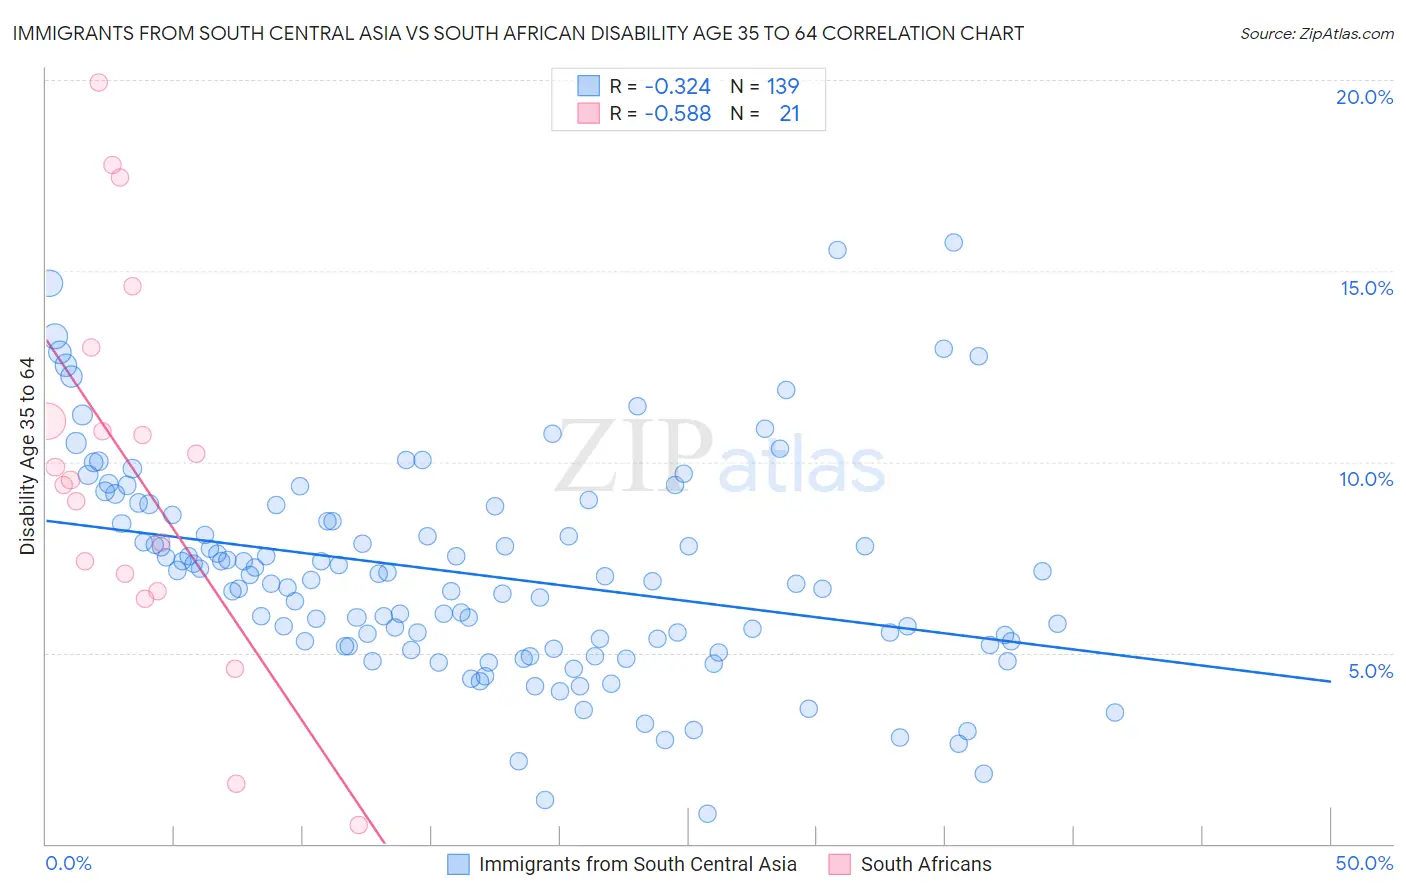 Immigrants from South Central Asia vs South African Disability Age 35 to 64